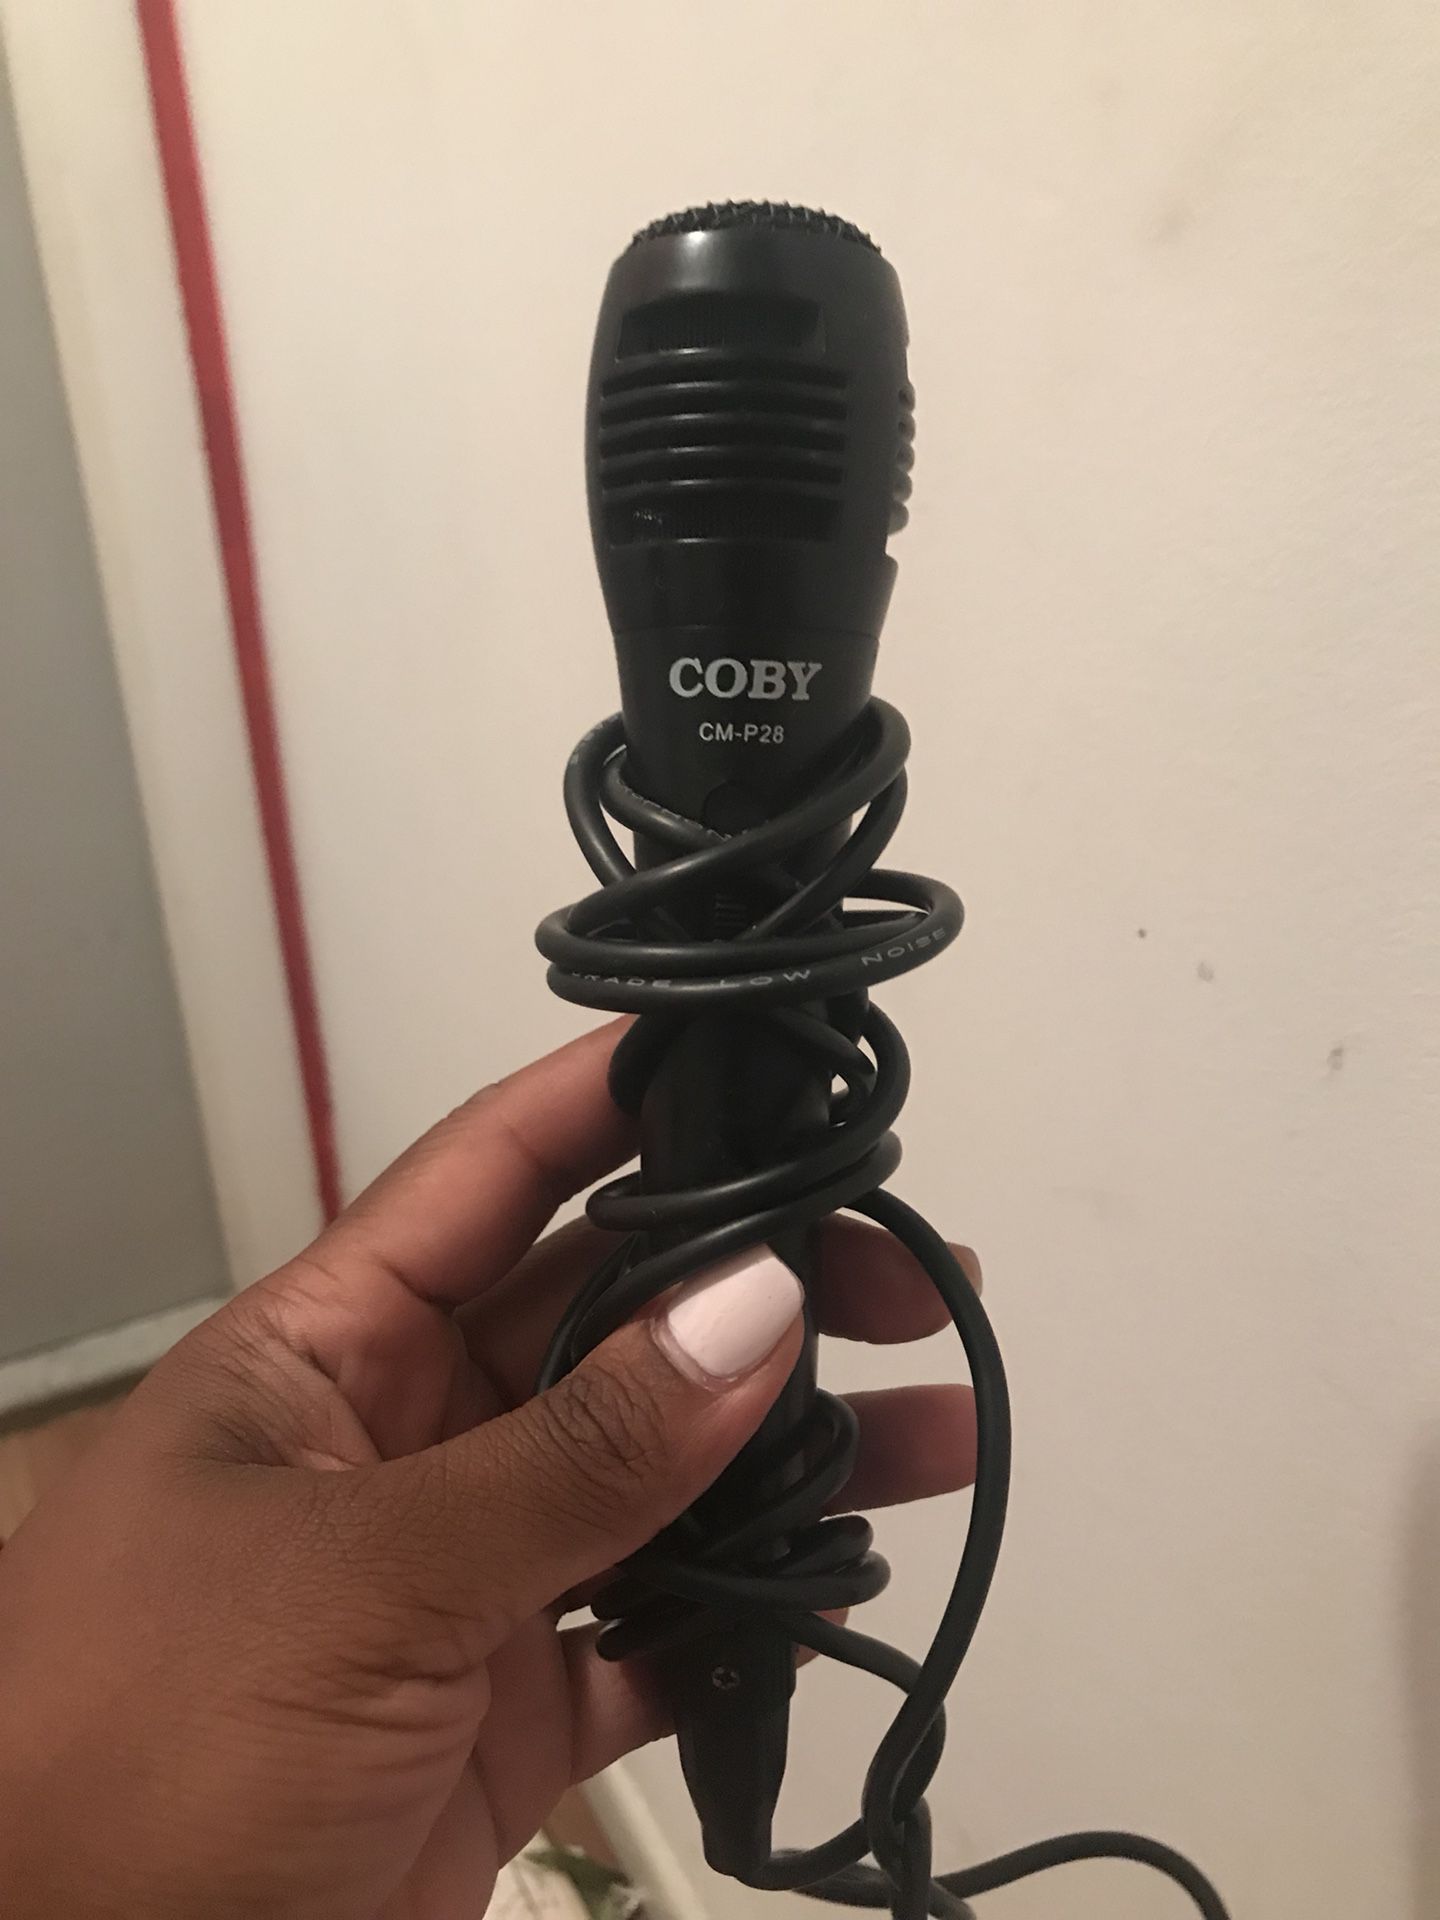 Brand new Coby microphone for stereo. Will be trashed on 7/20/18